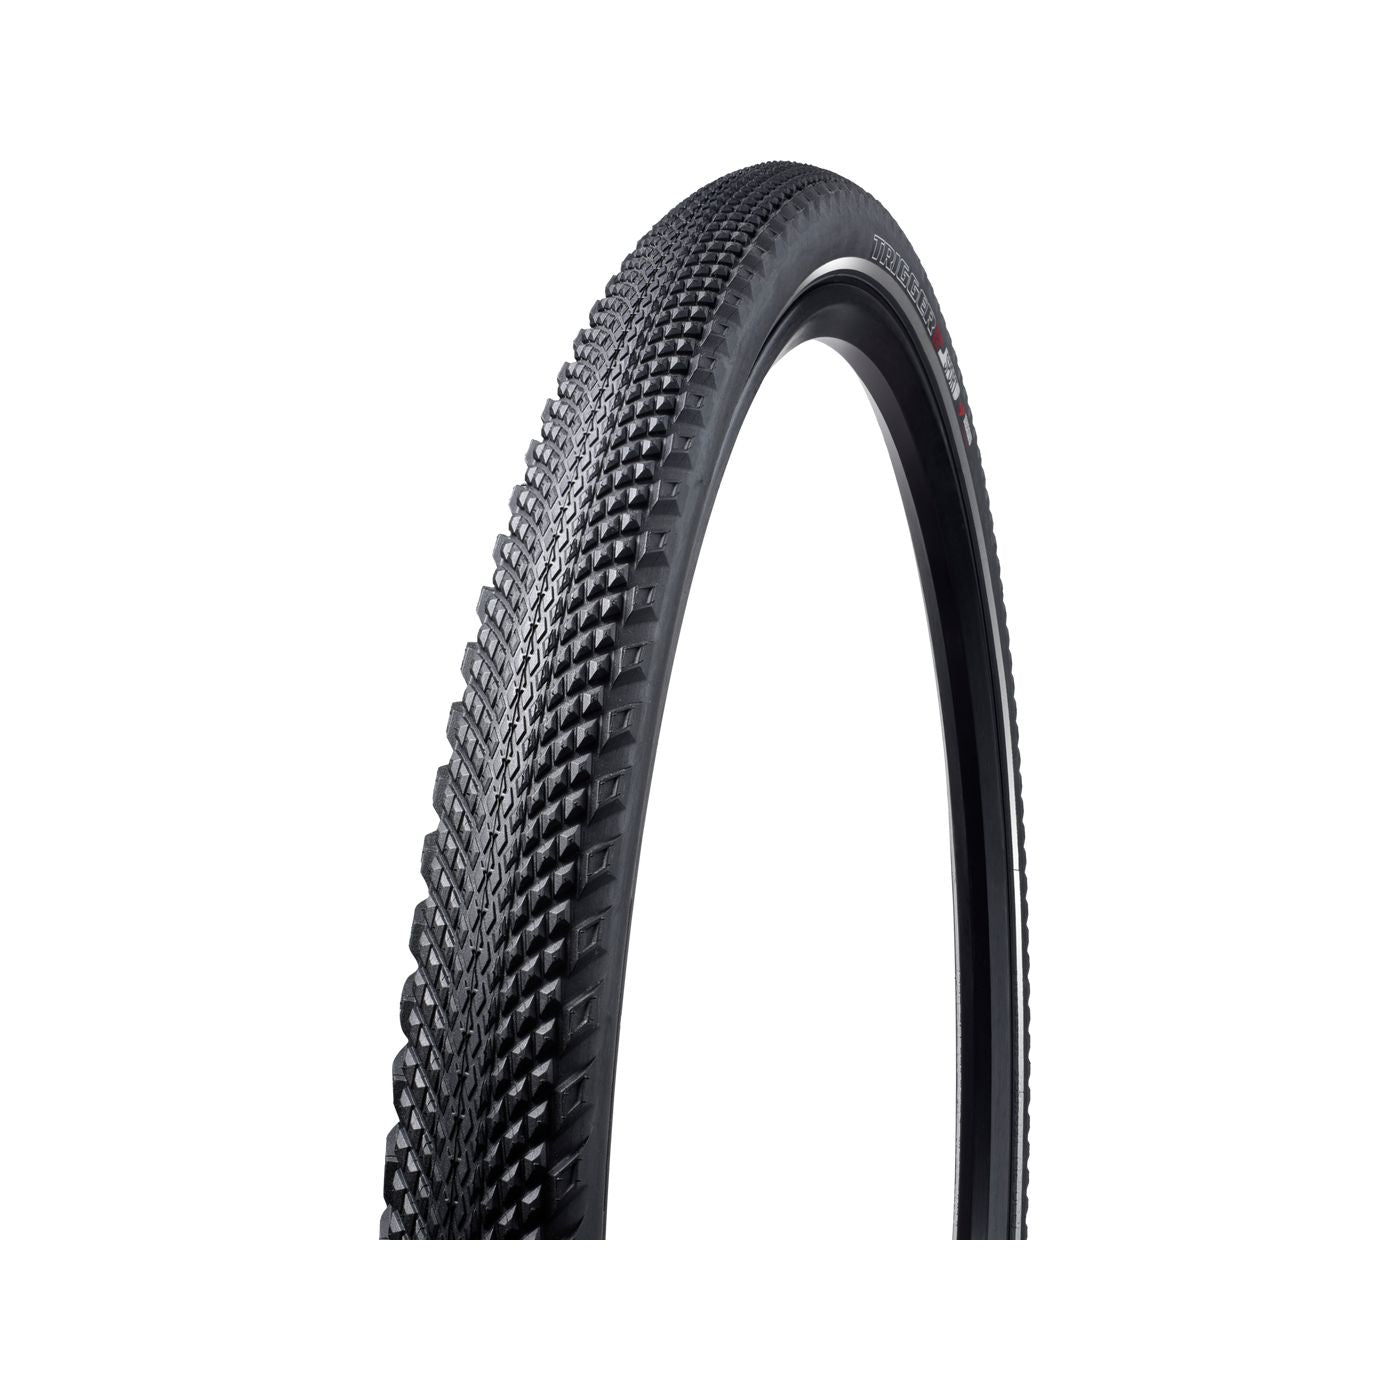 Specialized Trigger Sport Reflect 700c Bike Tire - Tires - Bicycle Warehouse